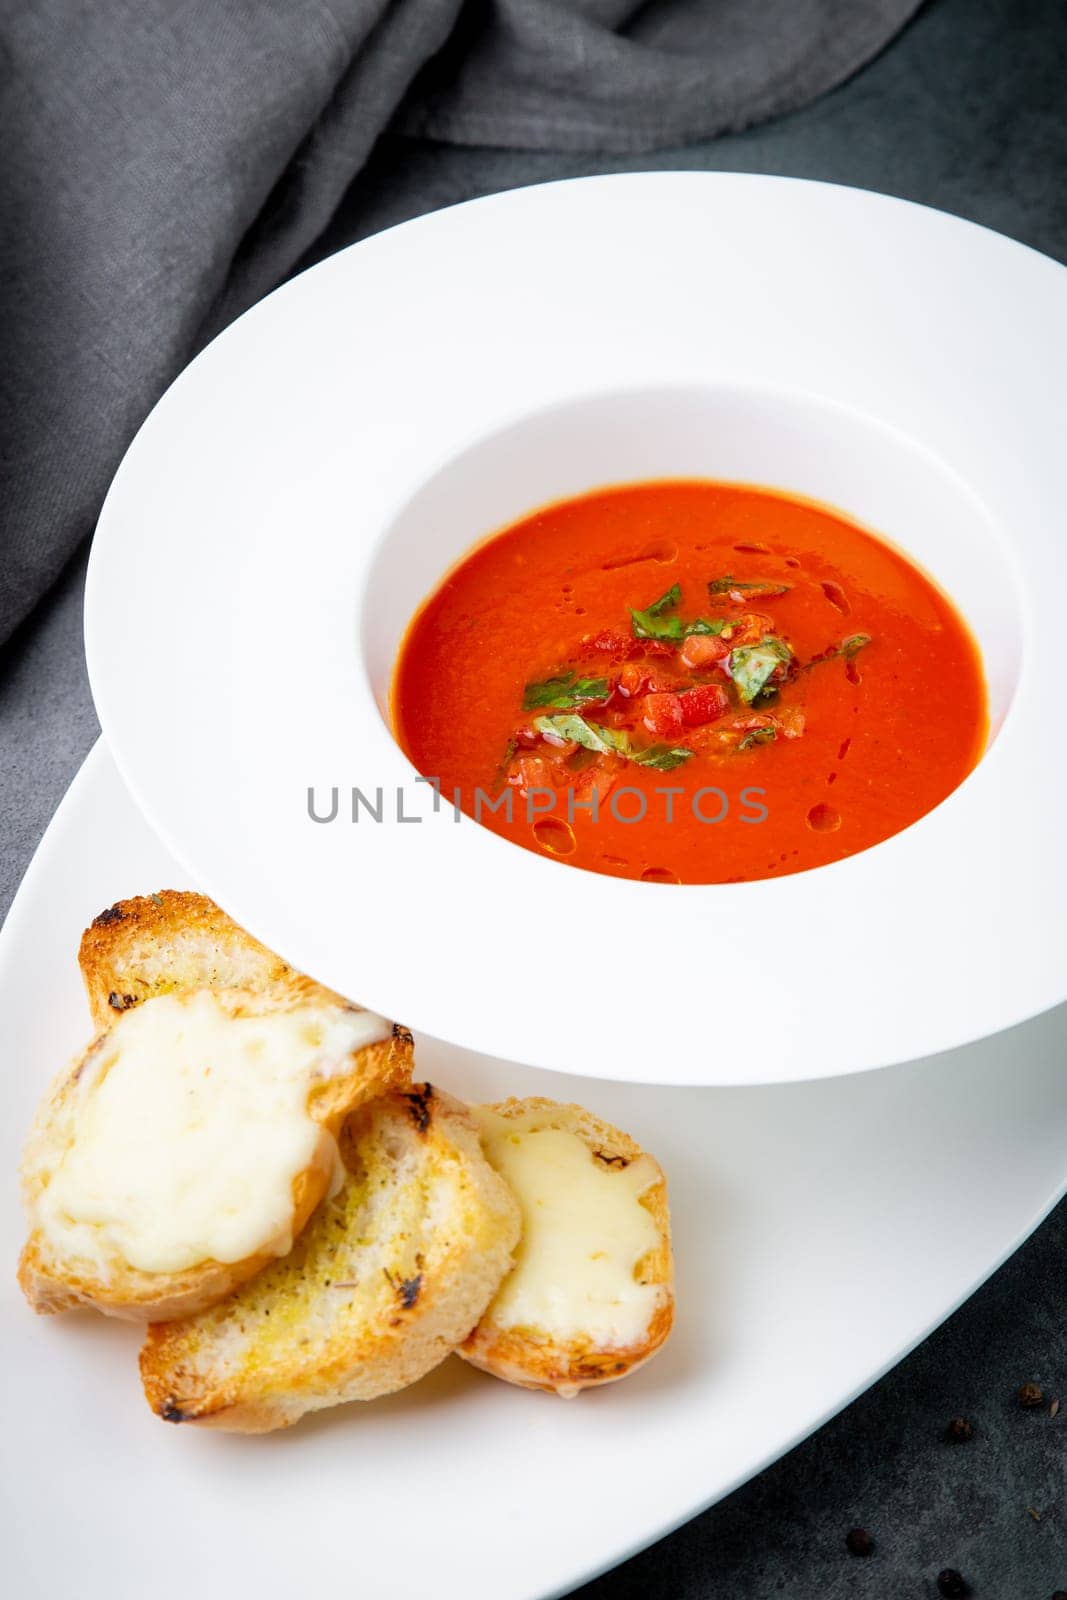 red tomato cream soup with herbs and toasted bread side view by tewolf